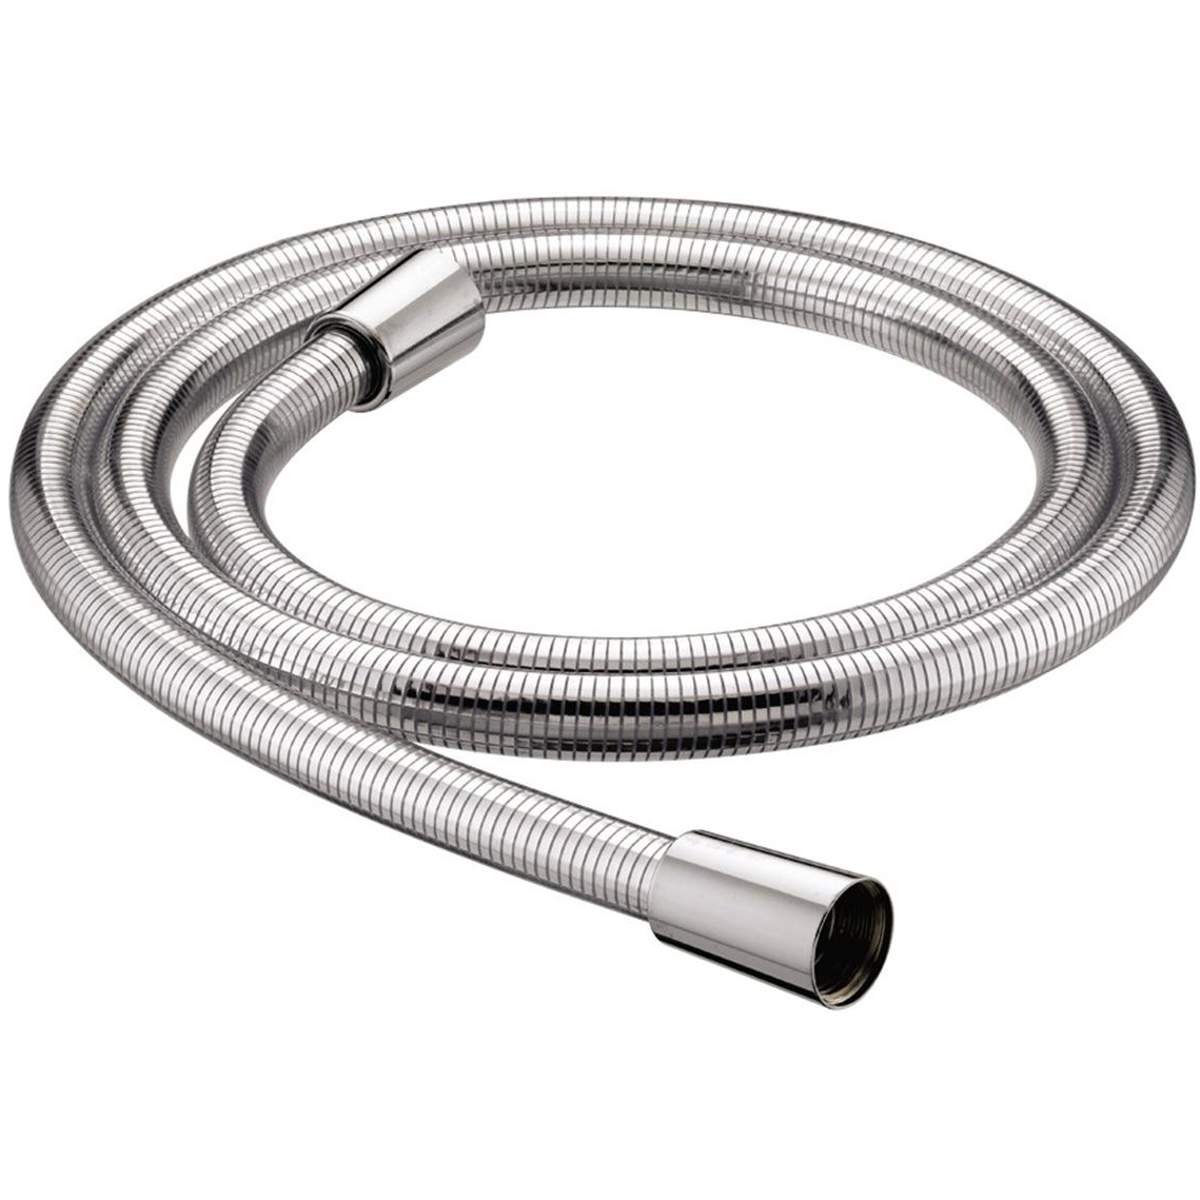 Bristan 1.75m Cone to Cone Easy Clean Shower Hose with 8mm Bore (HOS 175CCE01 C)